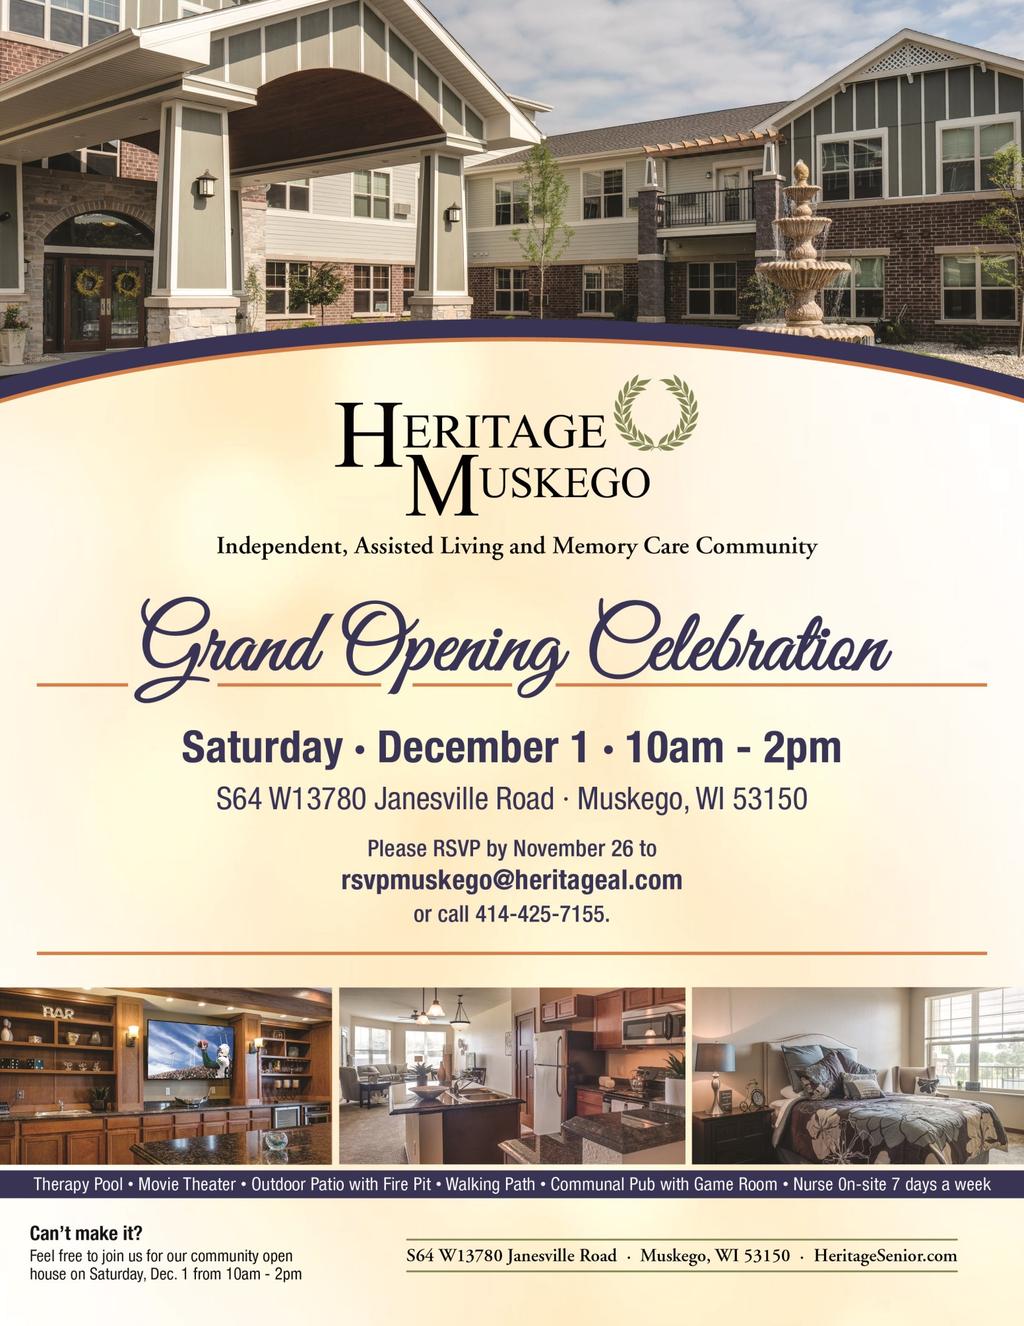 PAGE 4 Heritage Muskego Open House Heritage Muskego is an Independent, Assisted Living, and Memory Care Community built on Heritage Church s former property along